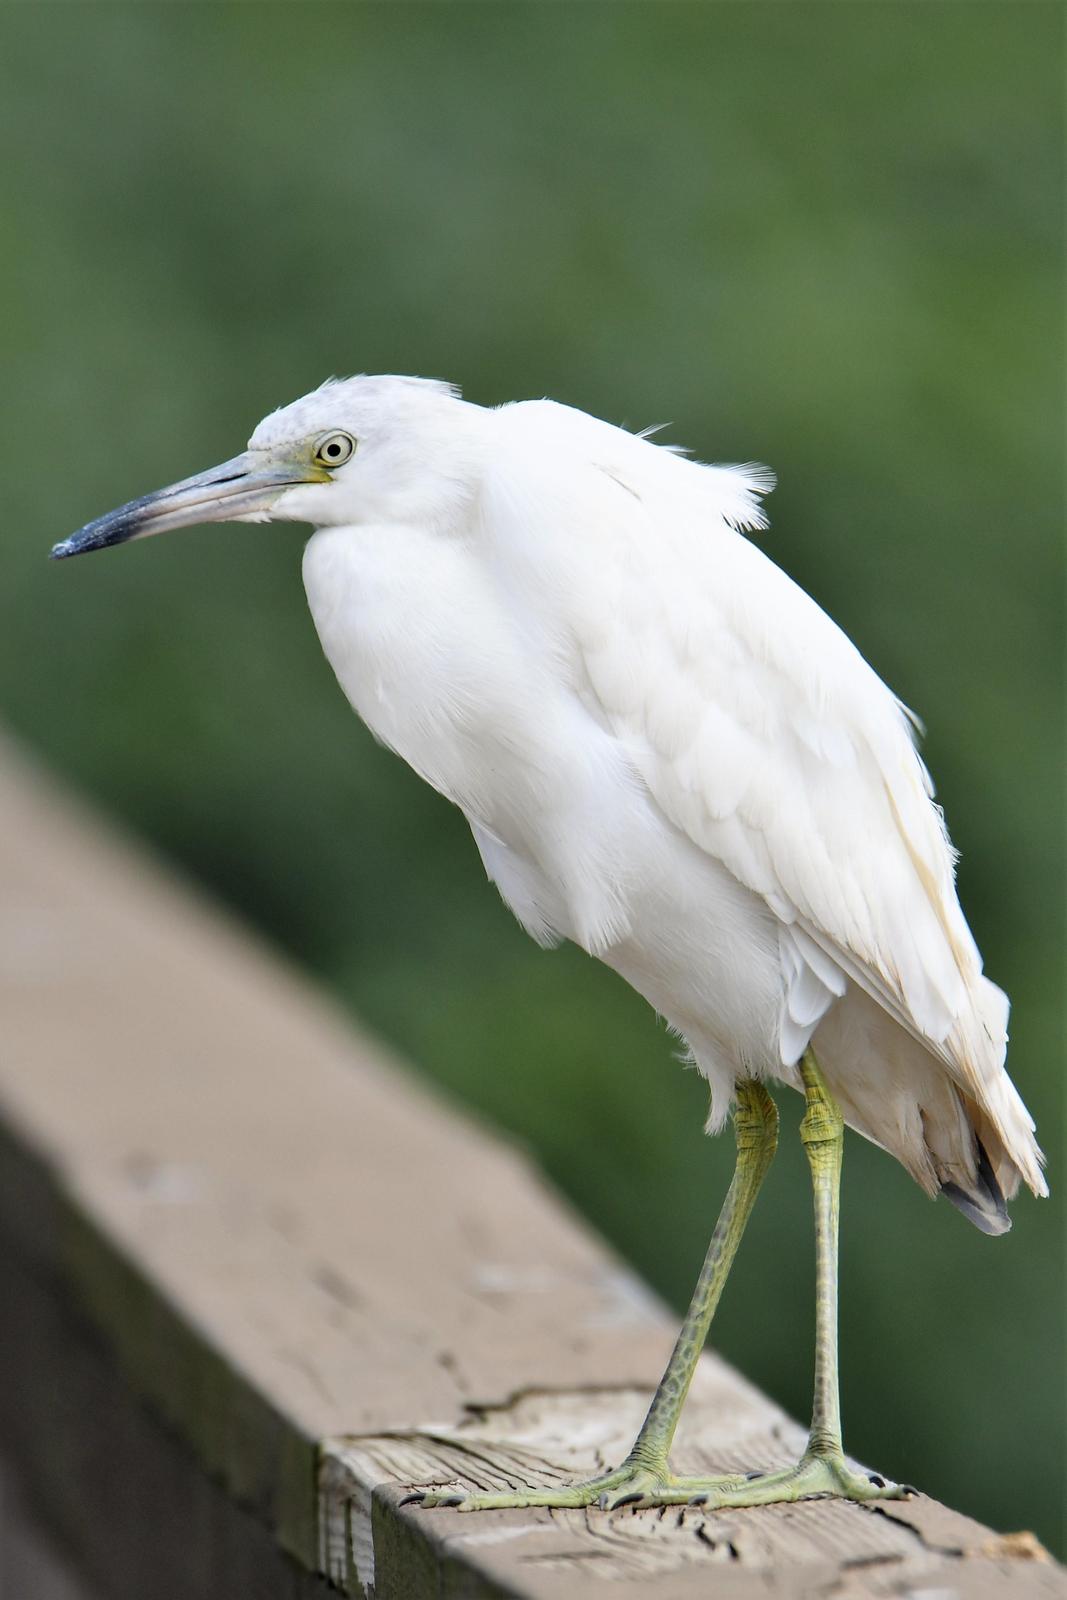 Little Blue Heron Photo by Jerry Chen